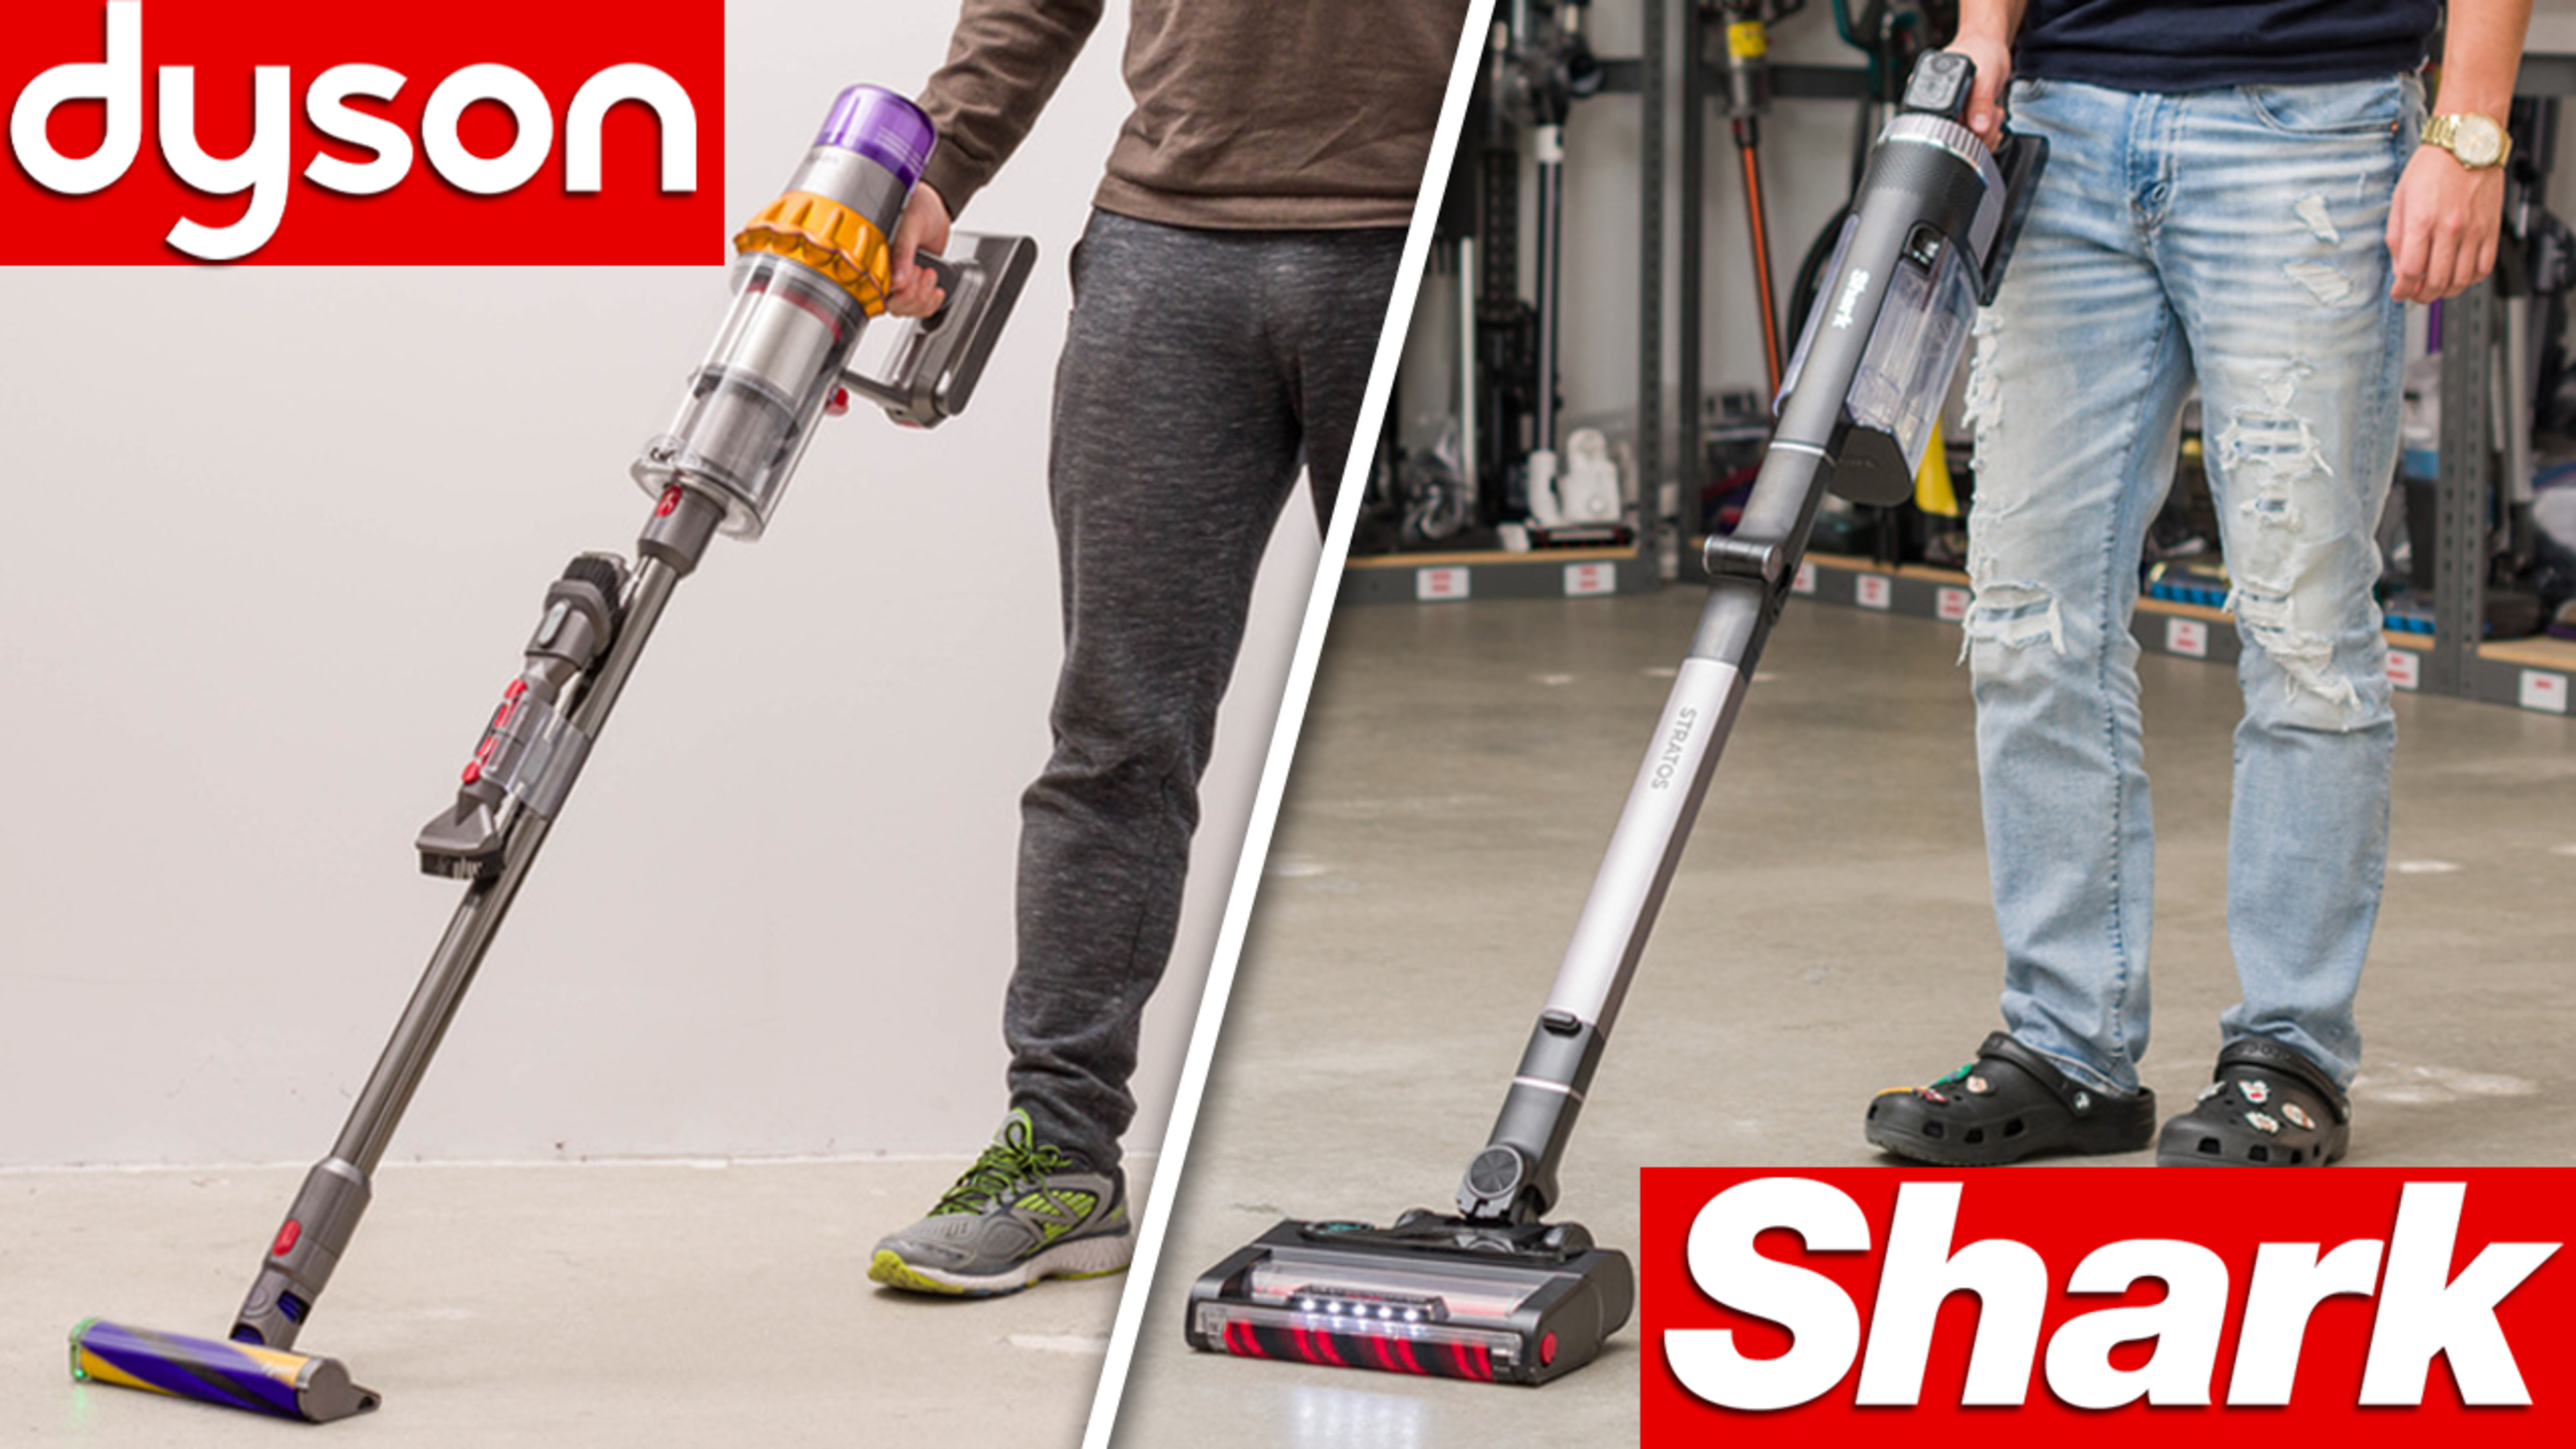 This Cordless Vacuum Cleaner That's 'Better Than Dyson' Is on Sale at